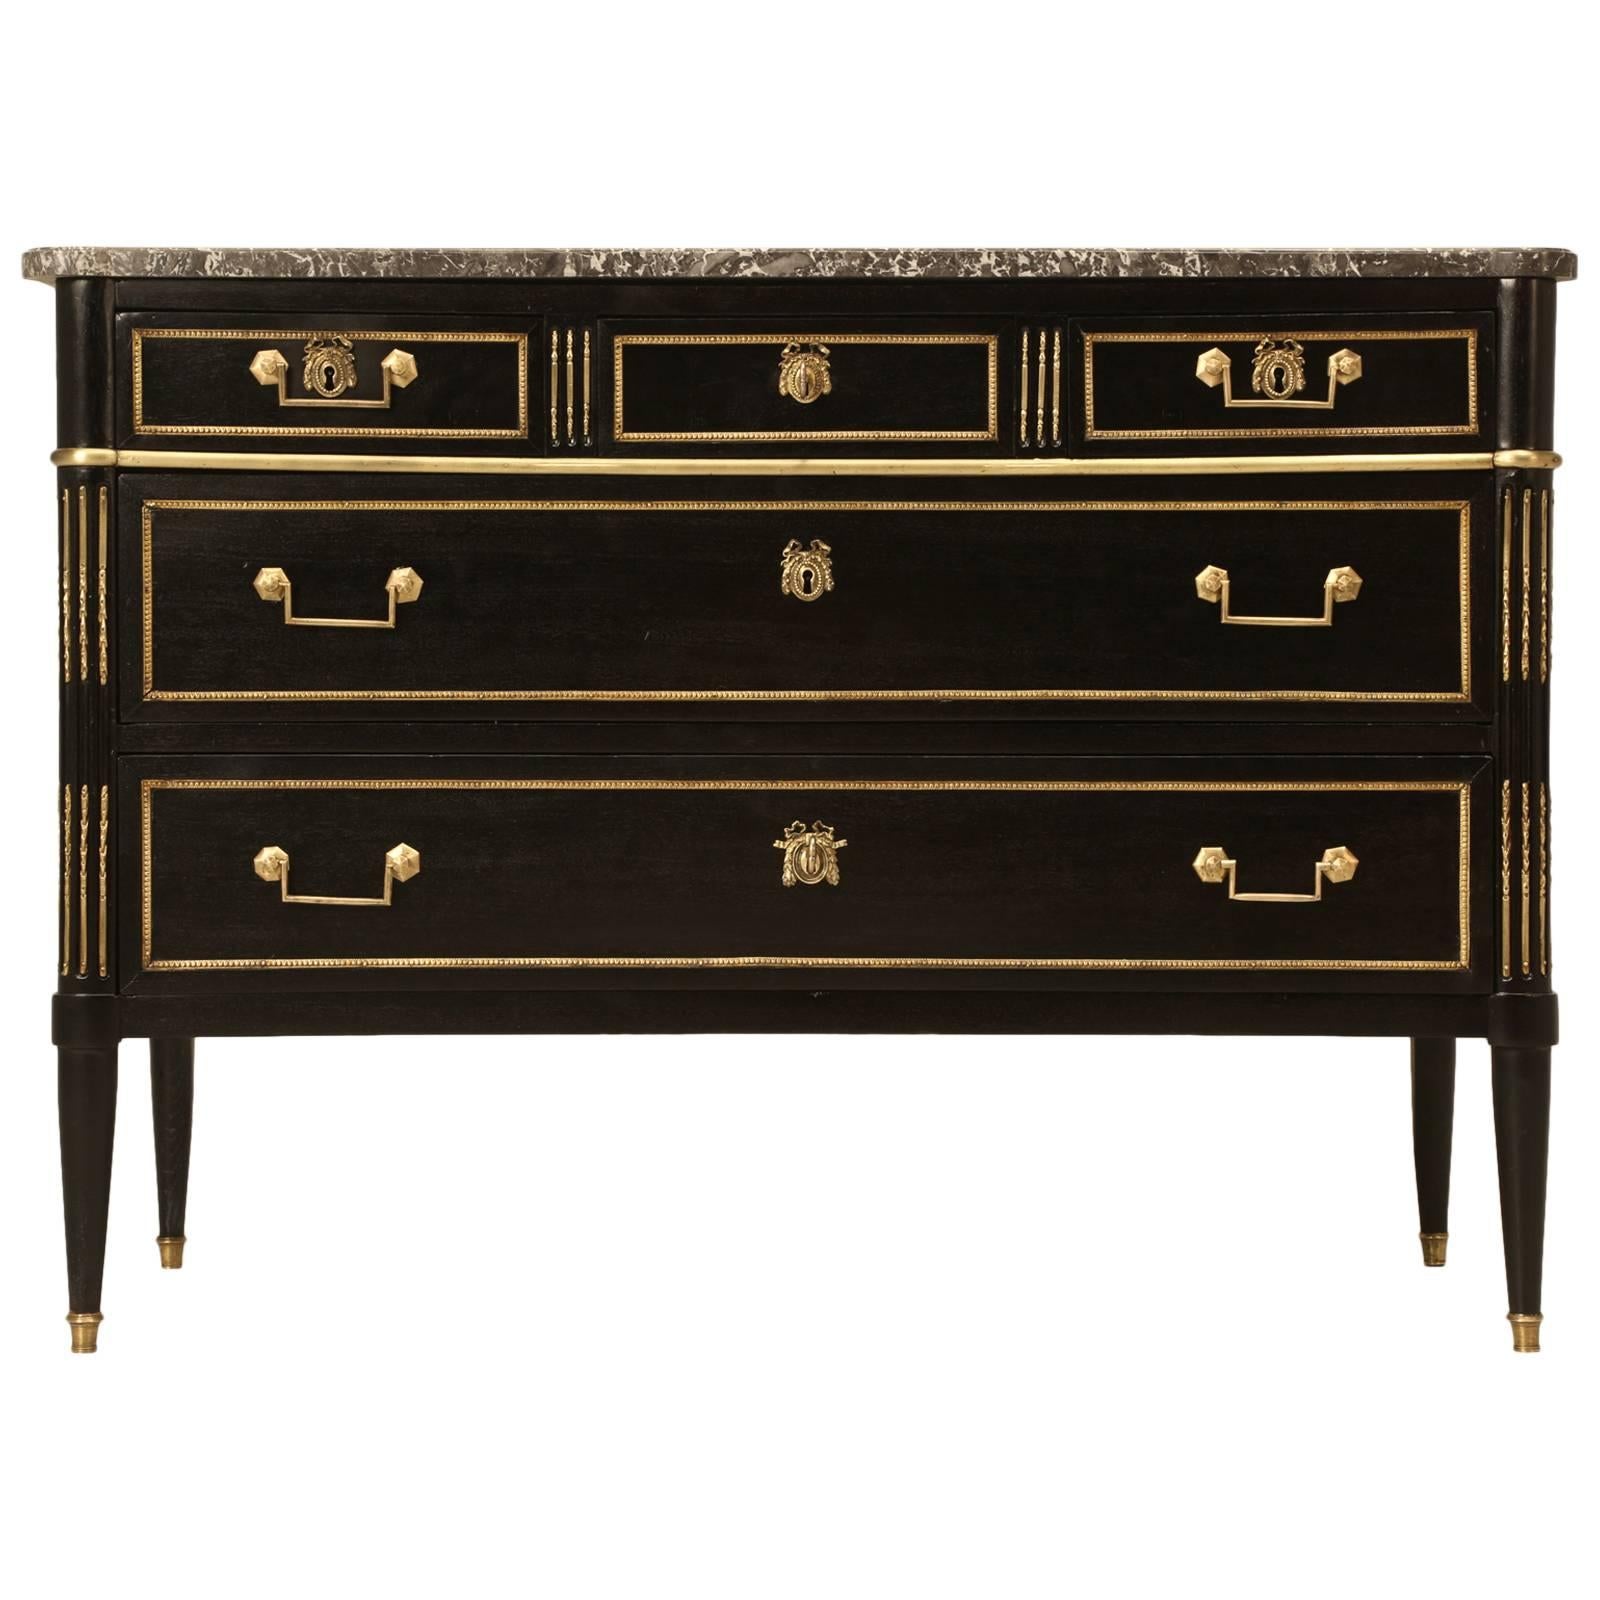 French Epoque Directoire Commode or Chest of Drawers